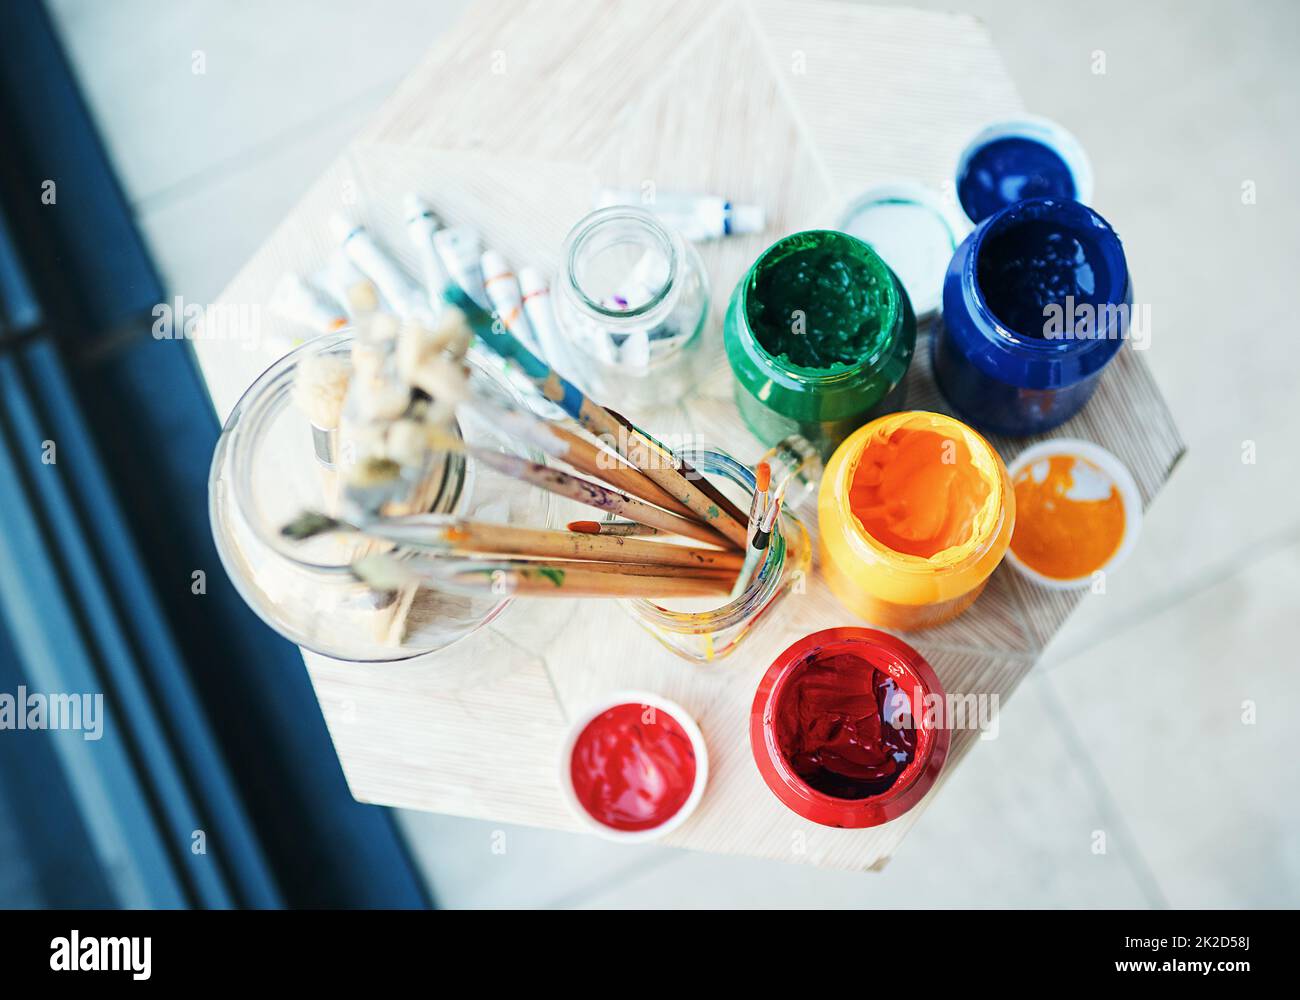 Its time to get creative. Still life shot of art supplies on a table. Stock Photo